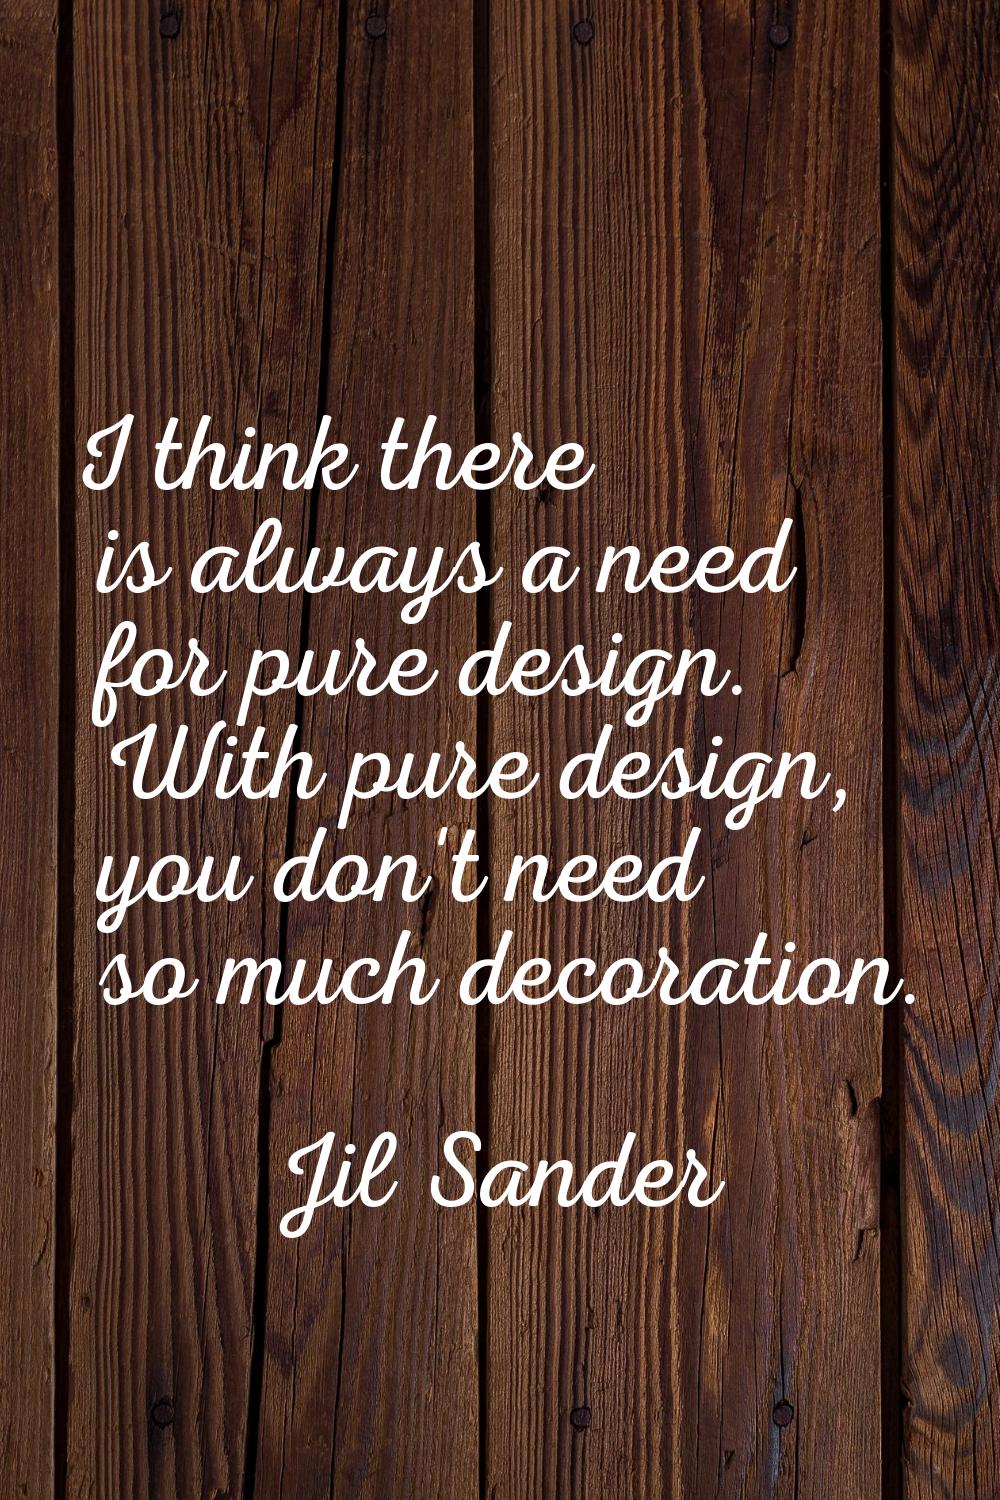 I think there is always a need for pure design. With pure design, you don't need so much decoration